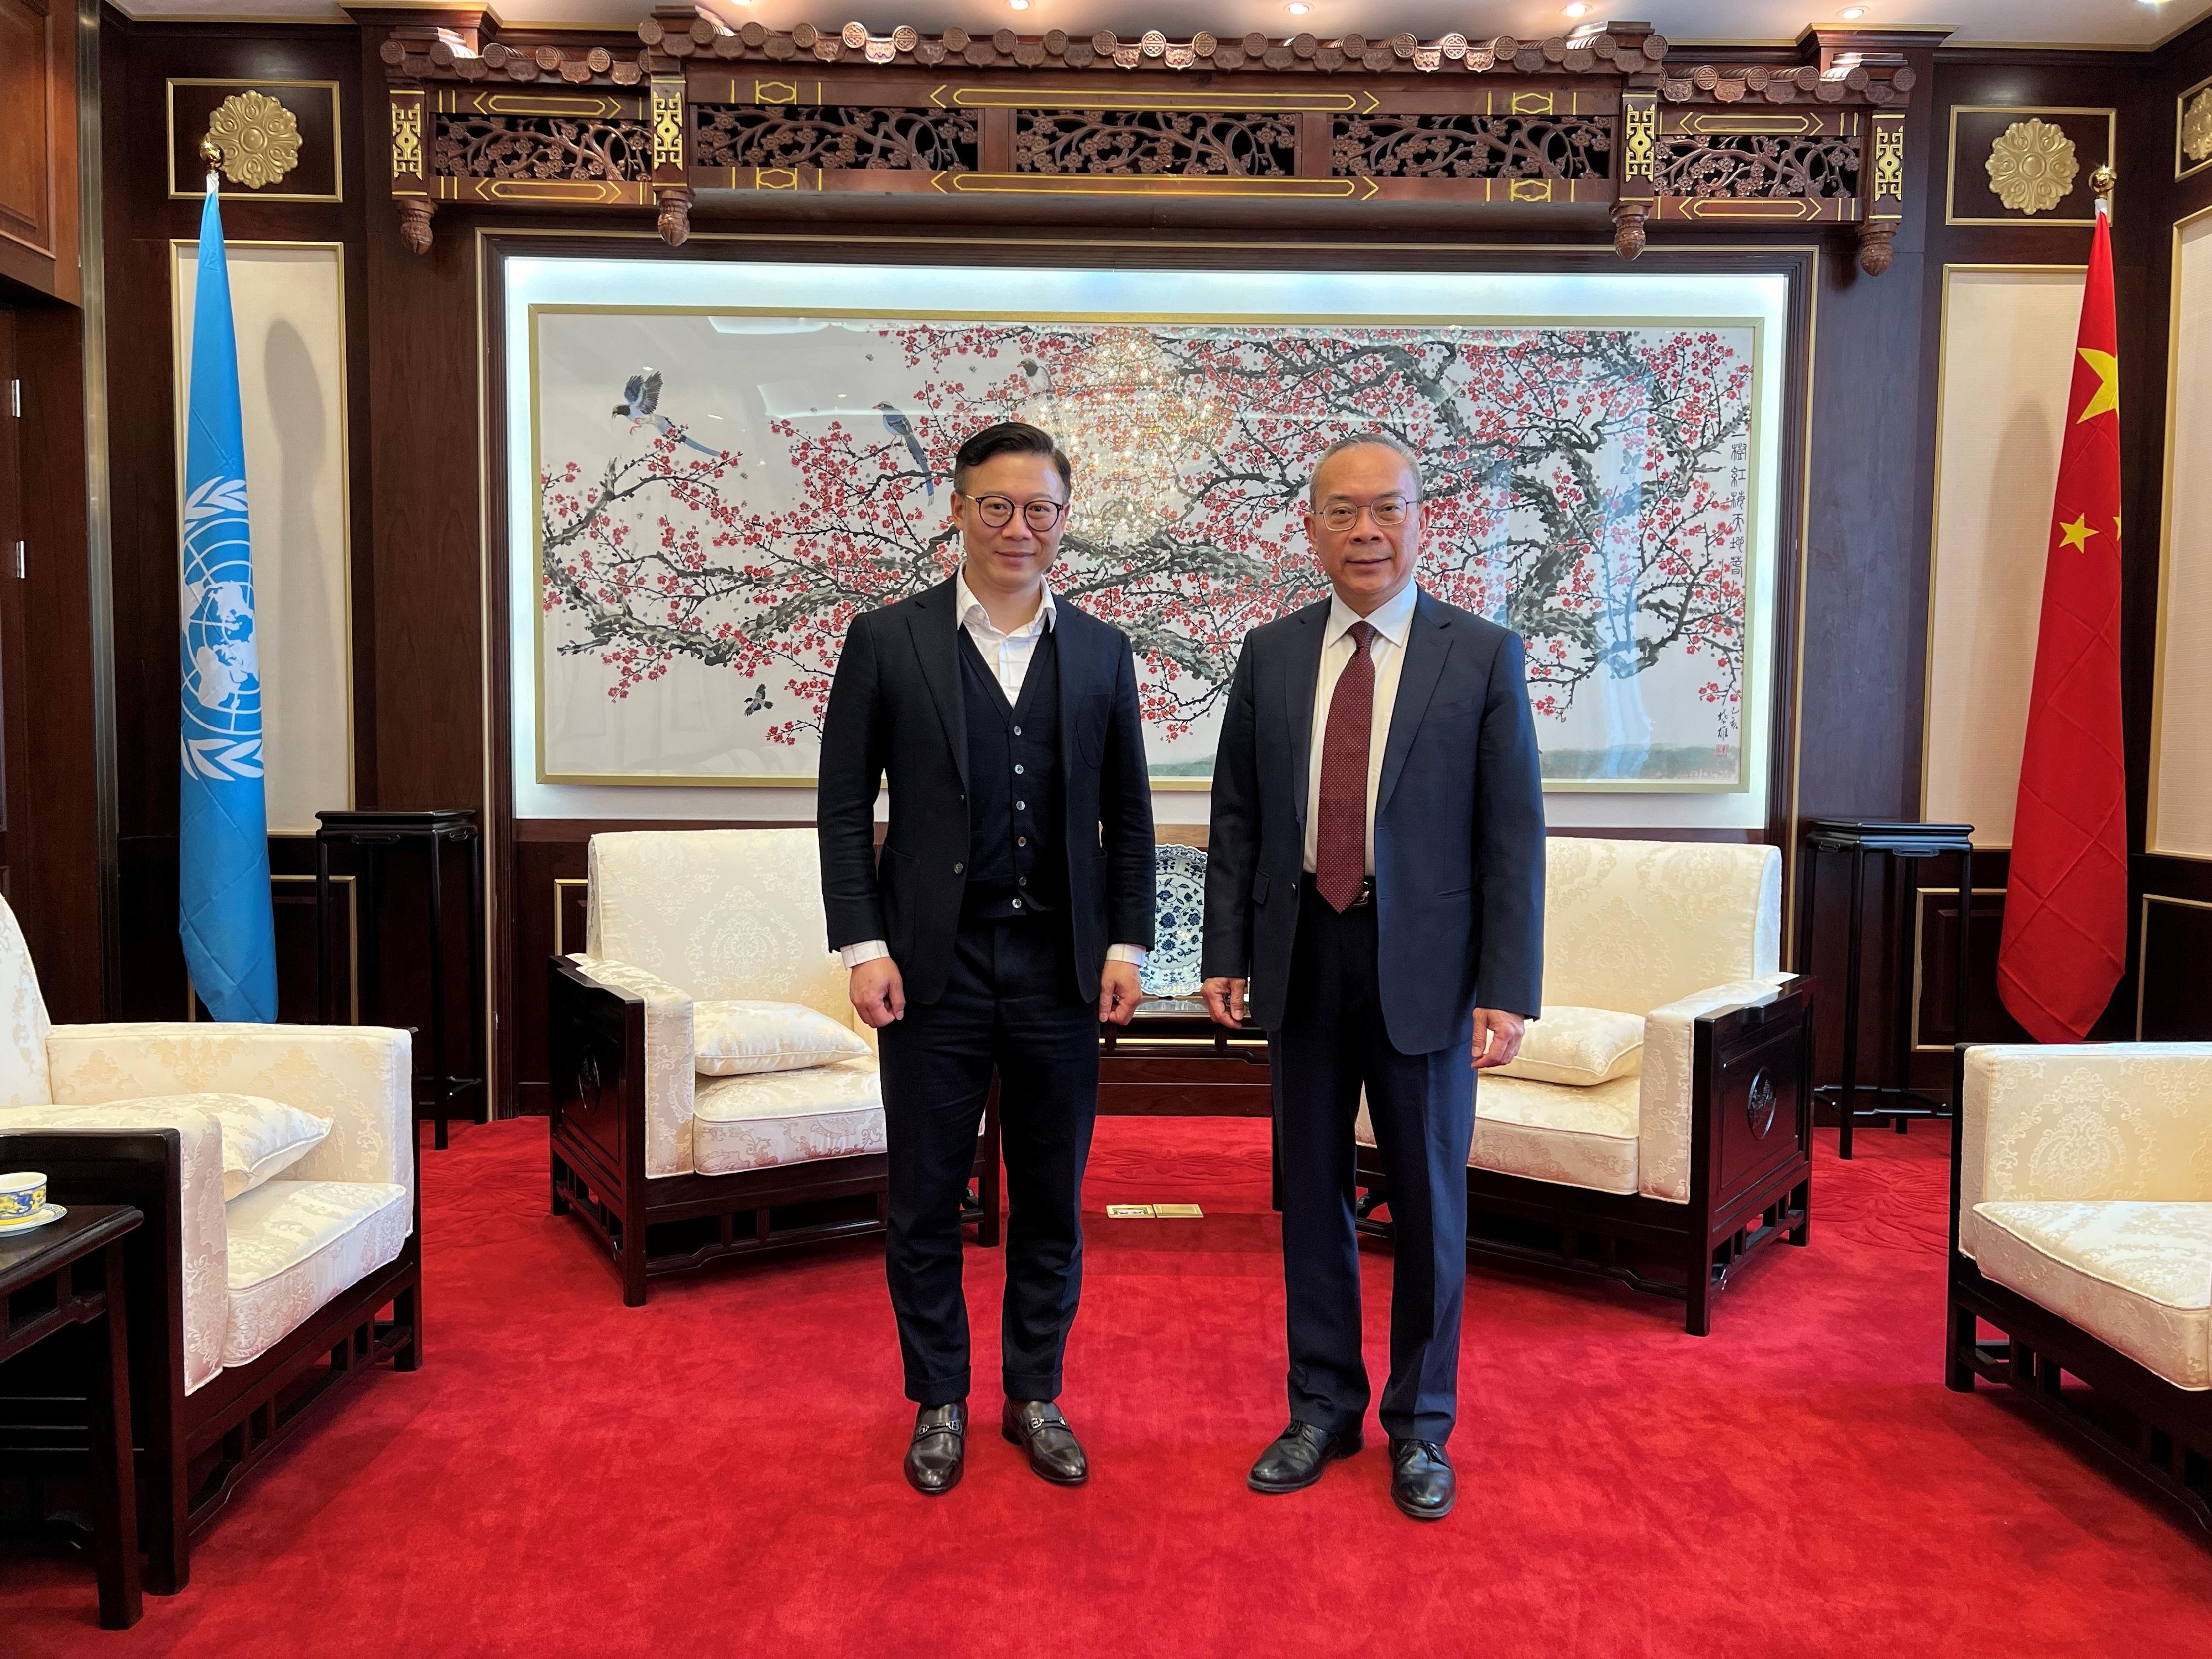 The Deputy Secretary for Justice, Mr Cheung Kwok-kwan (left), called on the Permanent Representative and Ambassador Extraordinary and Plenipotentiary of the People's Republic of China to the United Nations Office at Vienna and Other International Organizations in Vienna, Mr Li Song (right), in Vienna, Austria, on March 7 (Vienna time).
